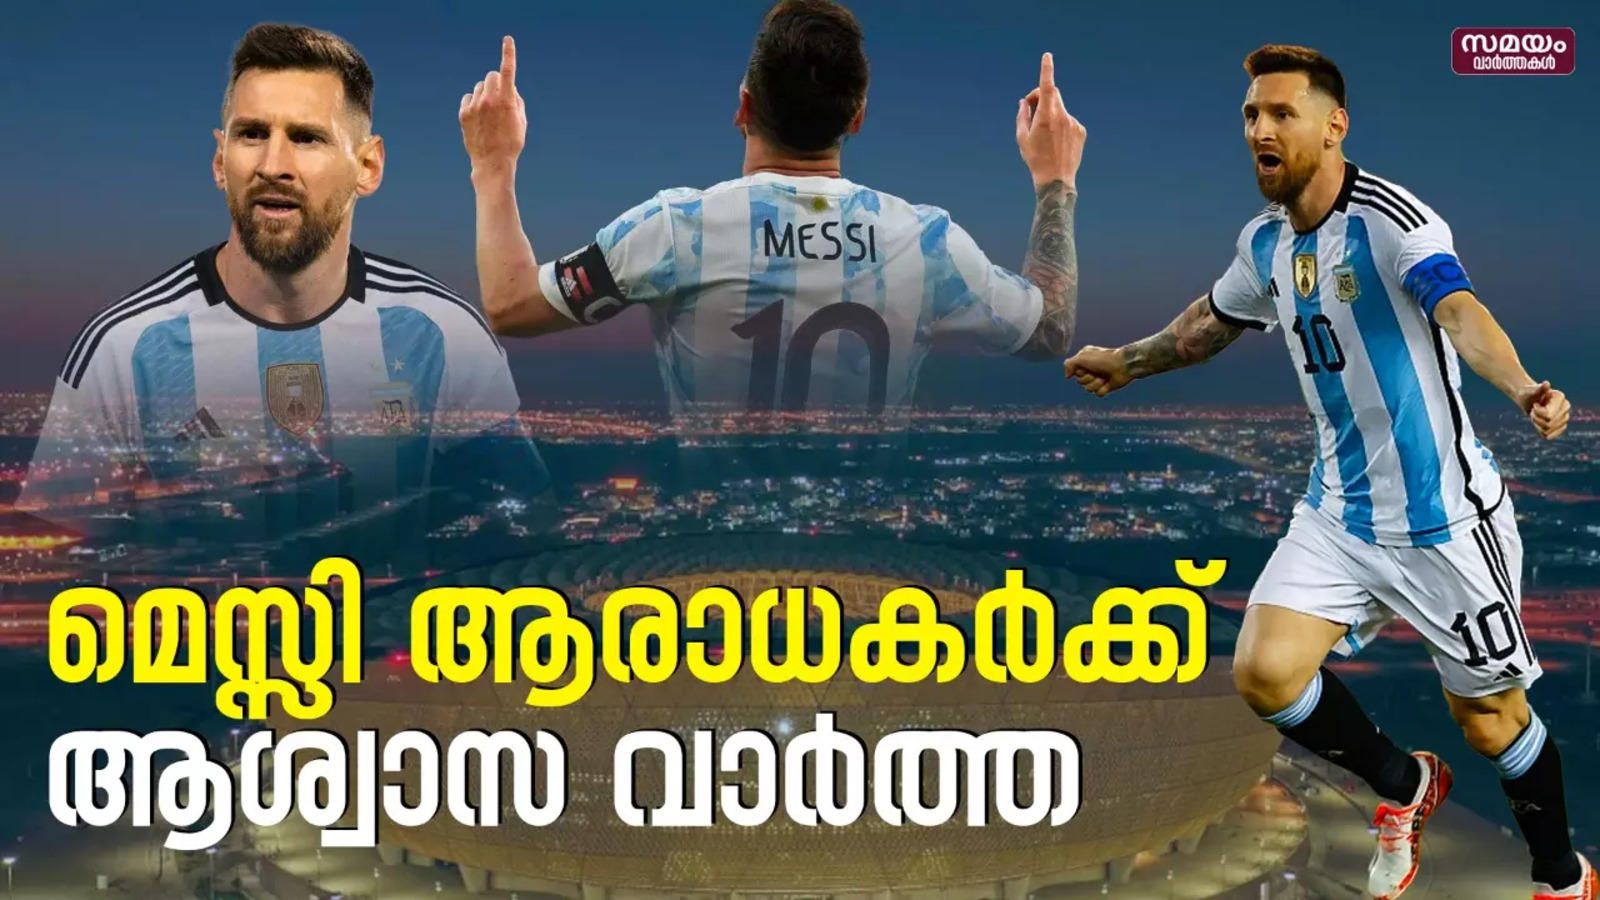 Fans Claim Louis Vuitton Ad Featuring Messi And Ronaldo As “Picture Of The  Century” → FHM India